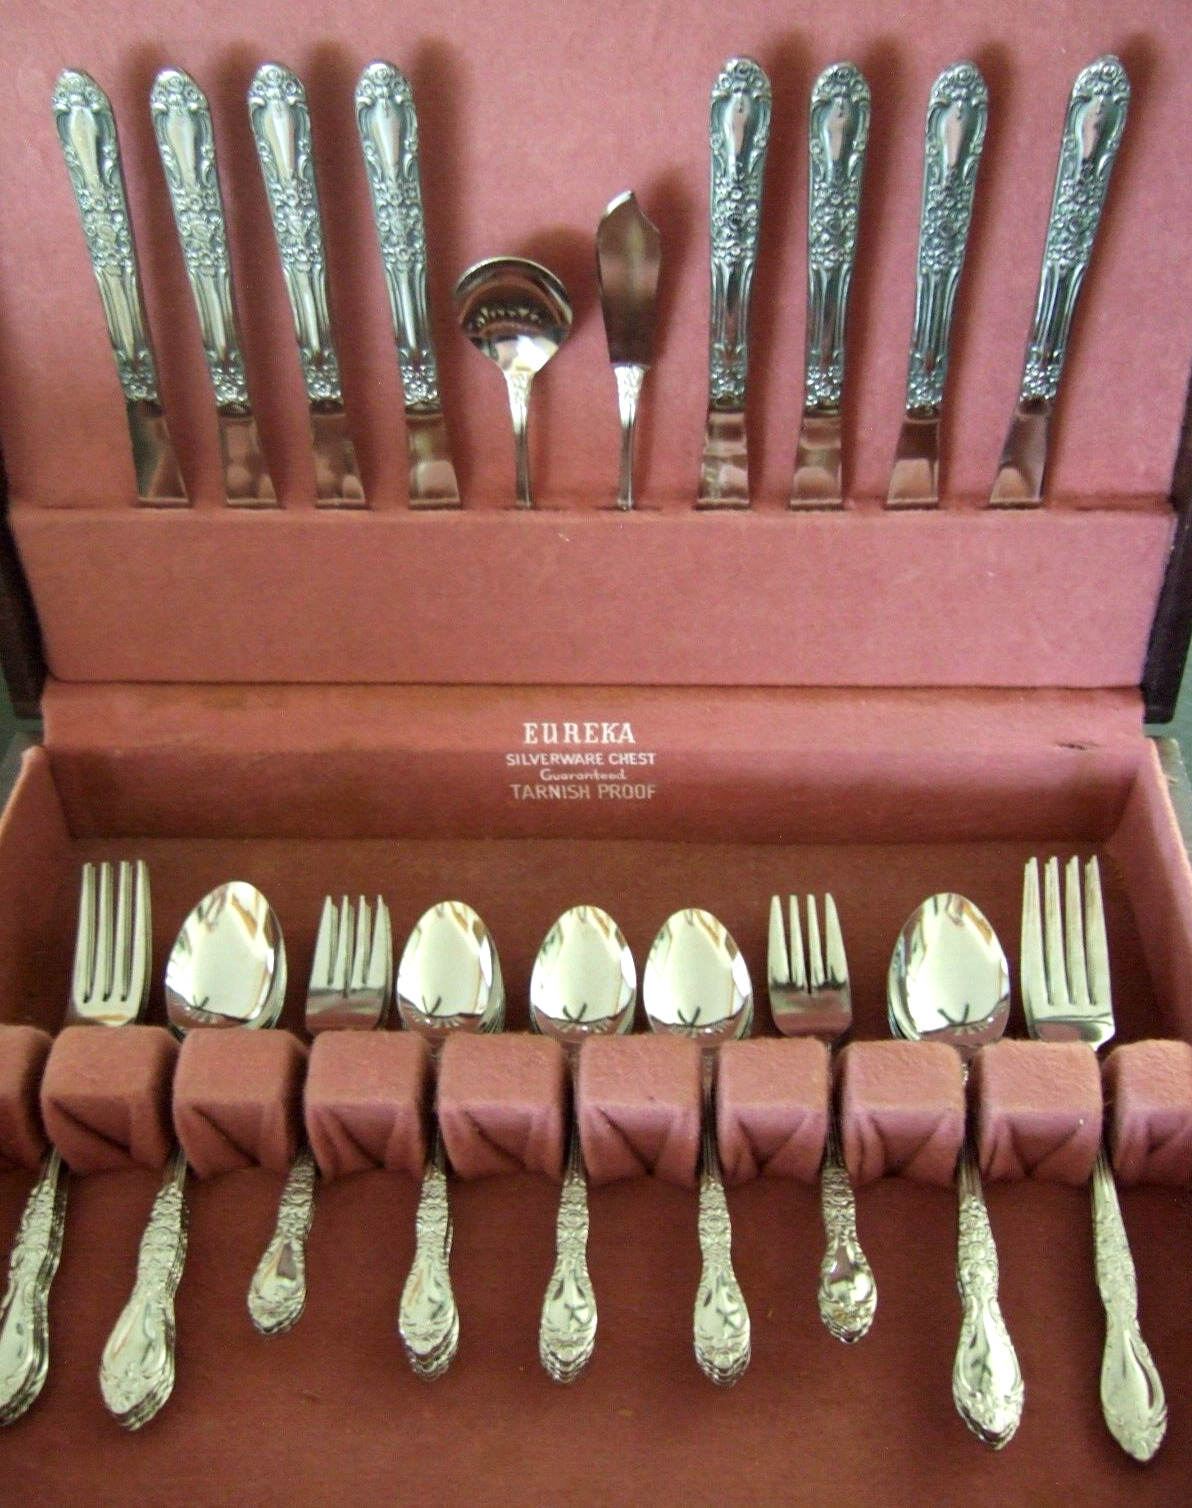 50 Pc Complete Service for 8 SANGO STAINLESS SILVERWARE SNF4 FLORAL ORNATE JAPAN